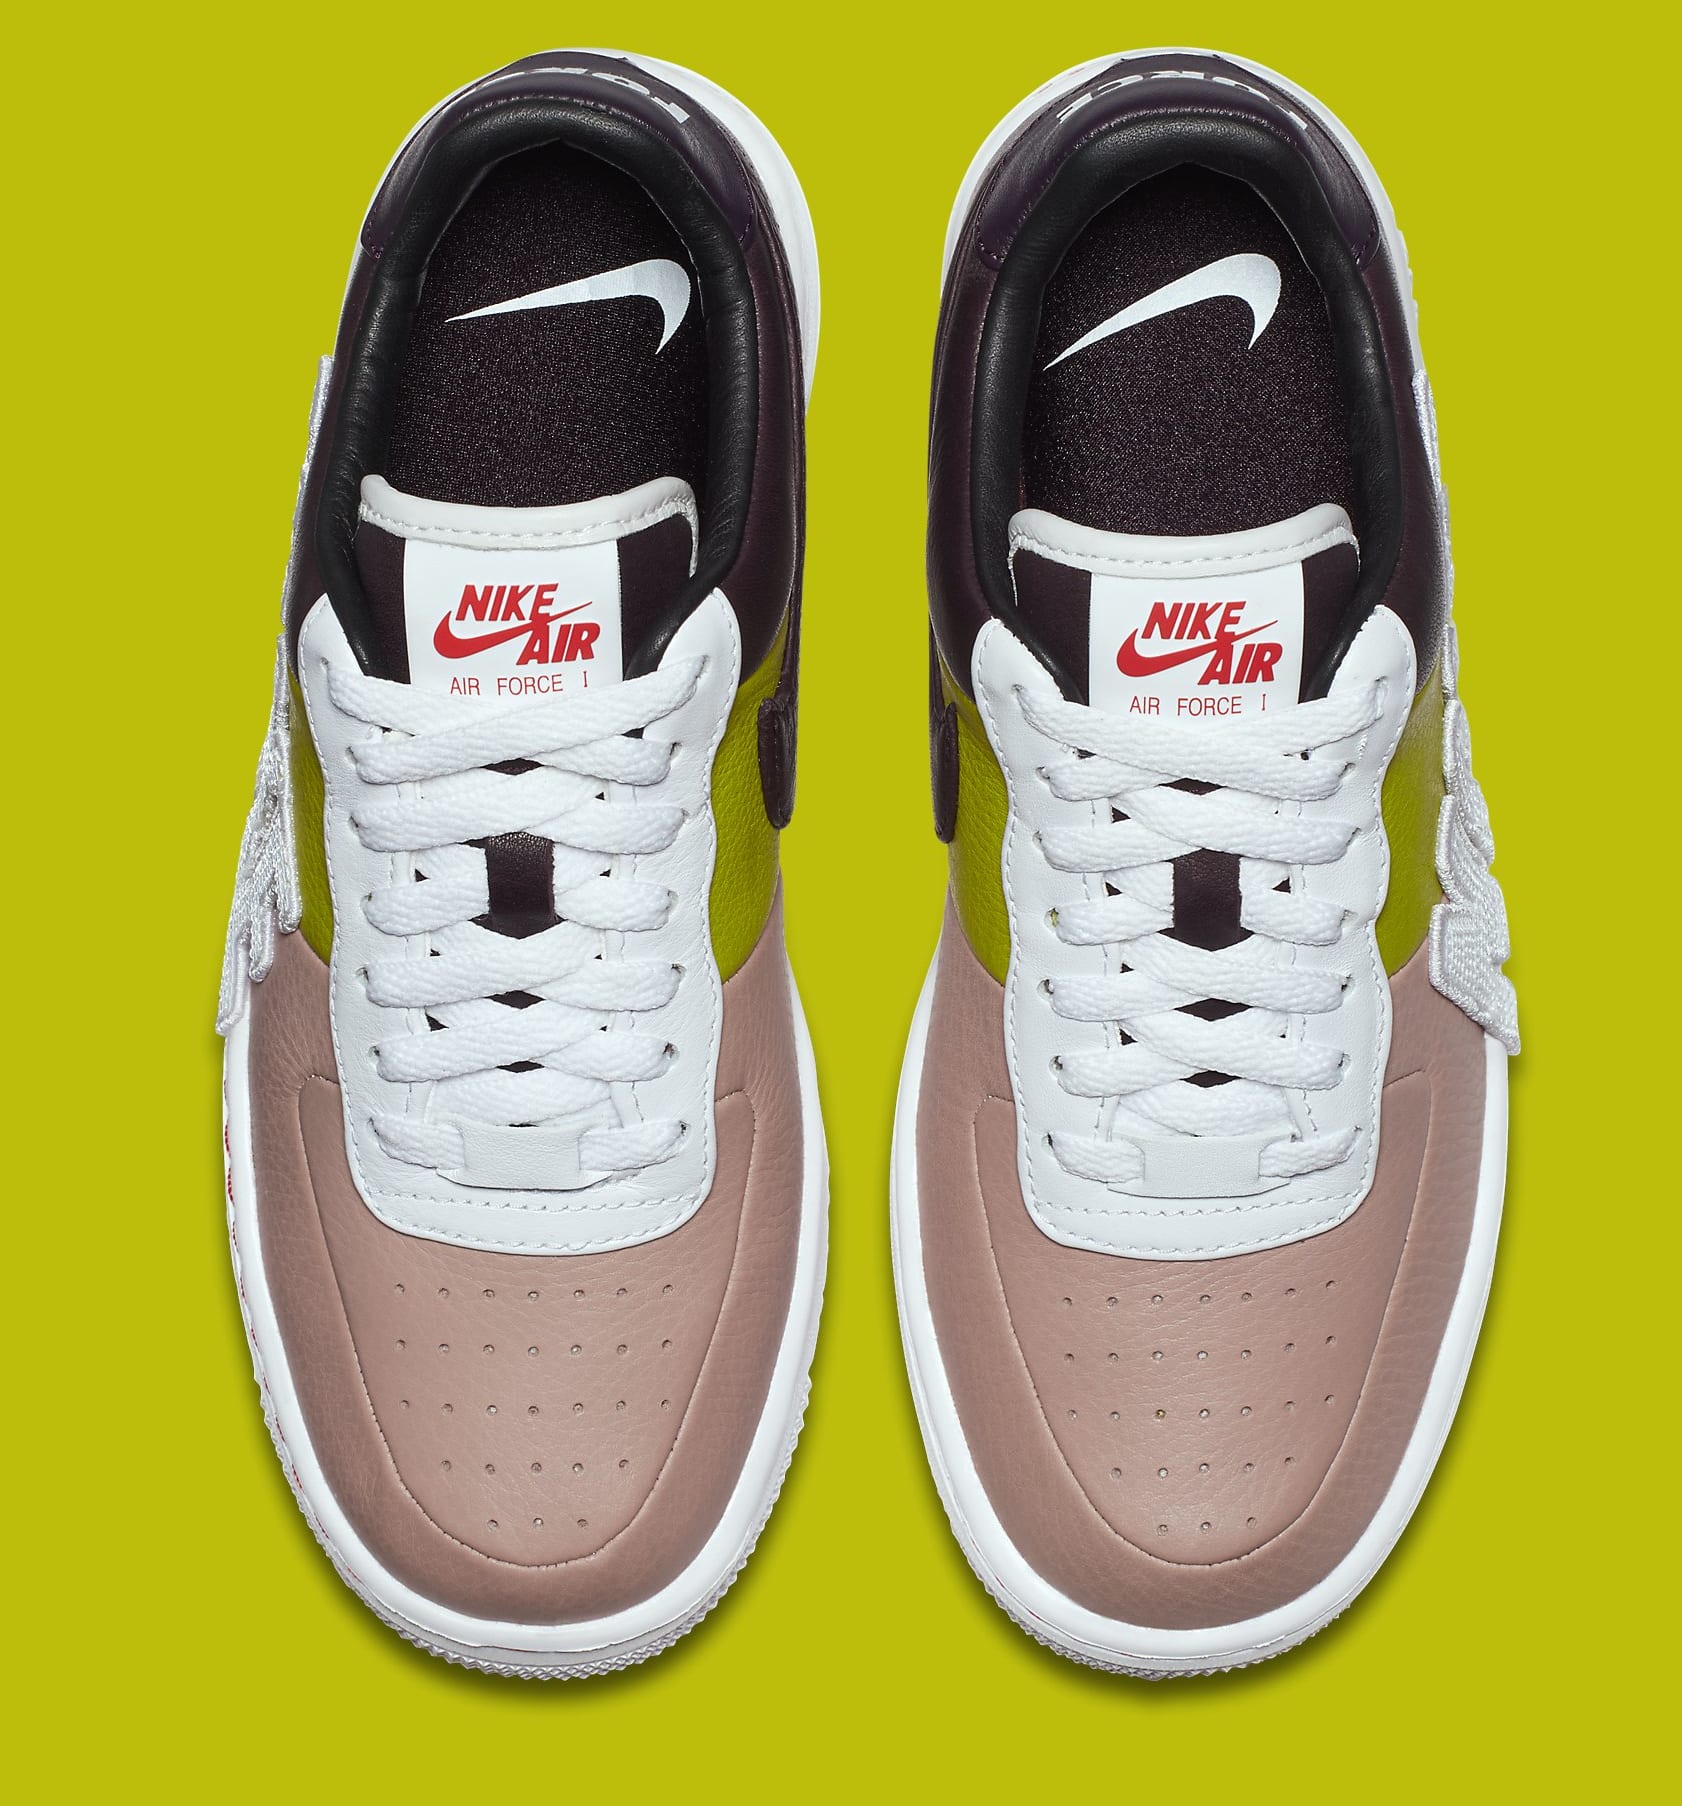 nike-air-force-1-low-upstep-lx-force-is-female